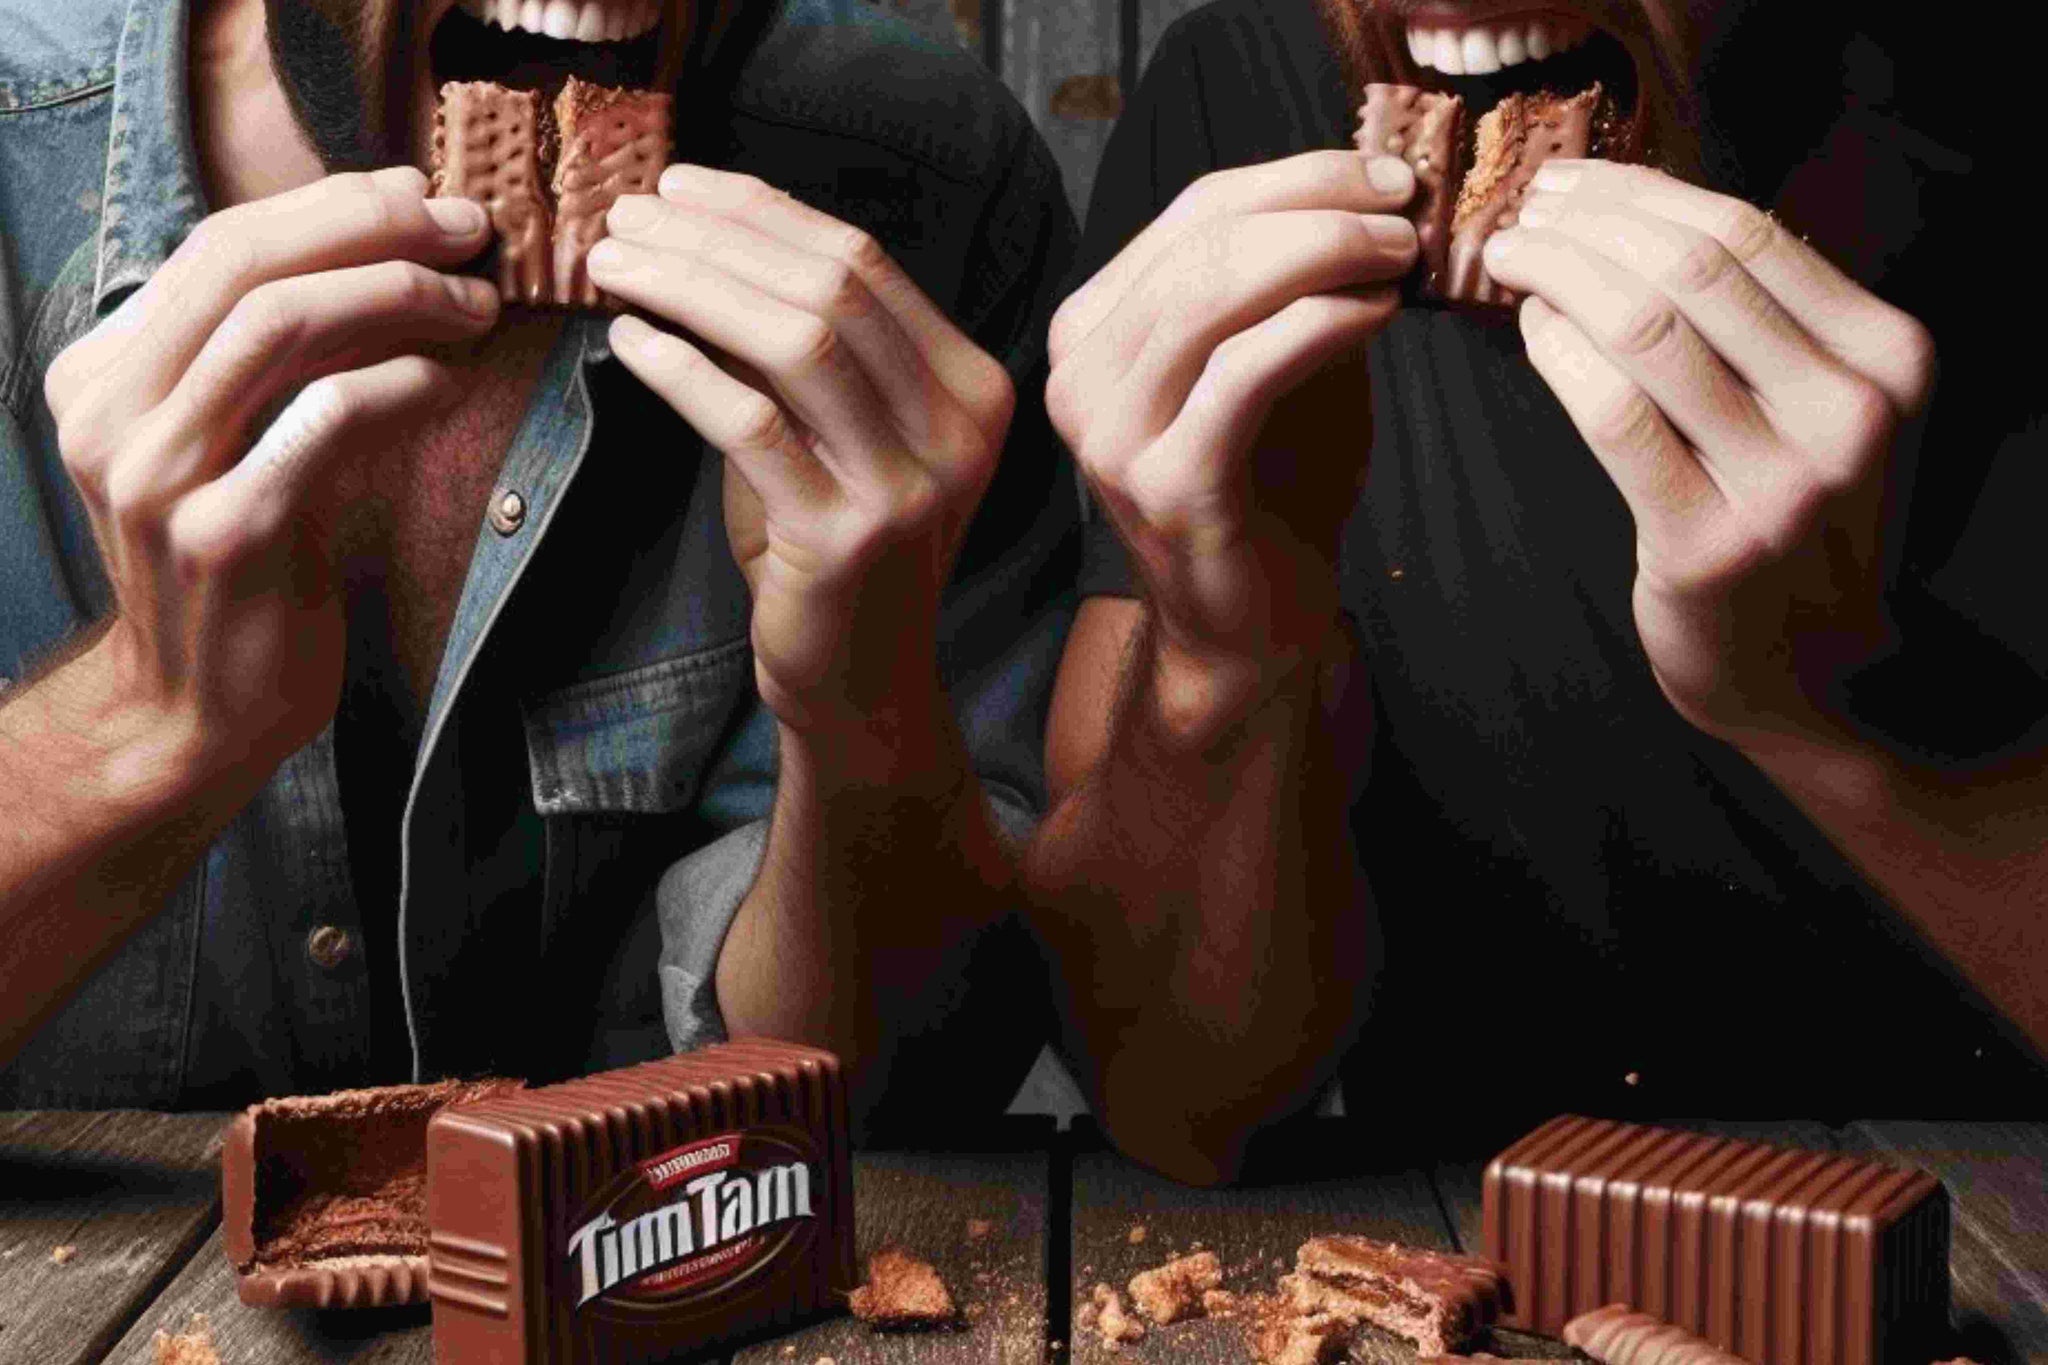 Manly Munchies: Tim Tams and Vegemite Dreams for Aussie Men